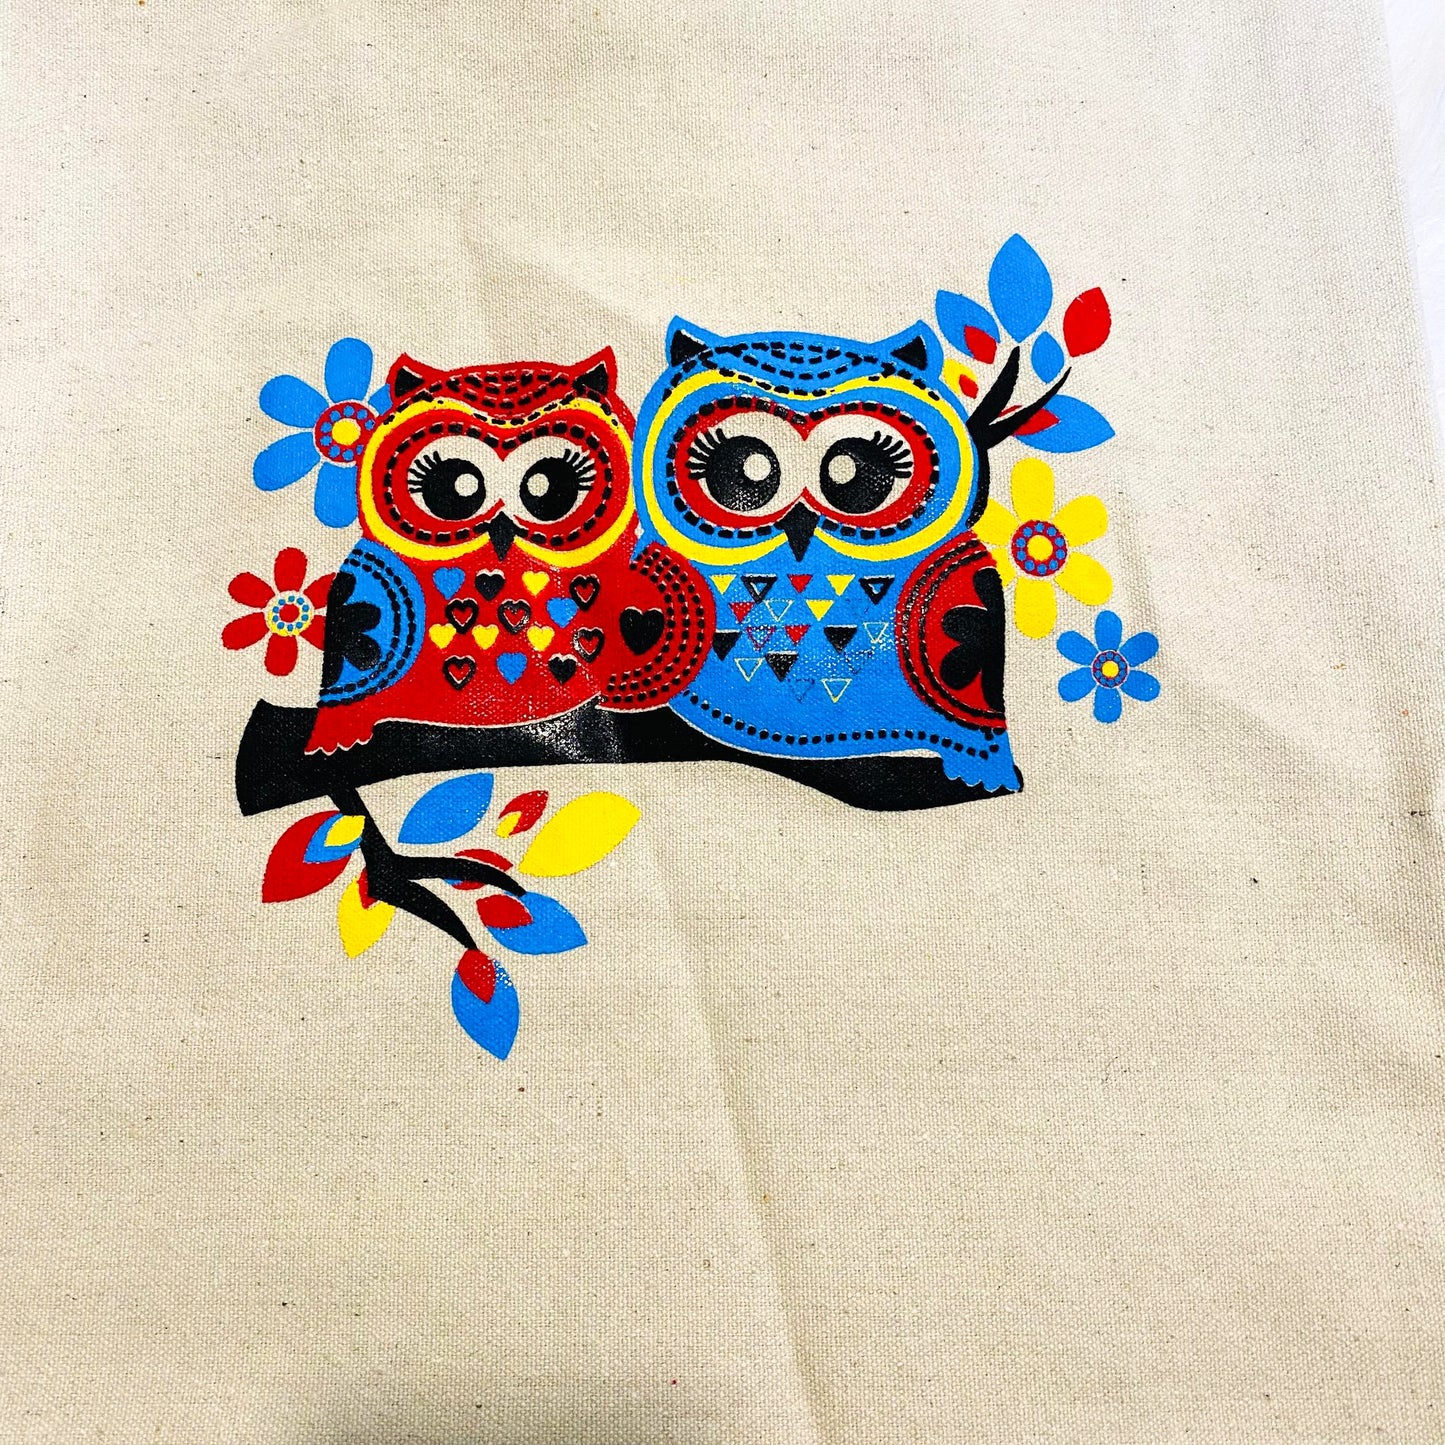 Owl Print Cotton Tote Bags, Canvas Tote Bag, Handmade Bags, Zippered Closure, Vegan Totes, Cute Tote Bags, Ecofriendly Bag, Gift For Him/Her